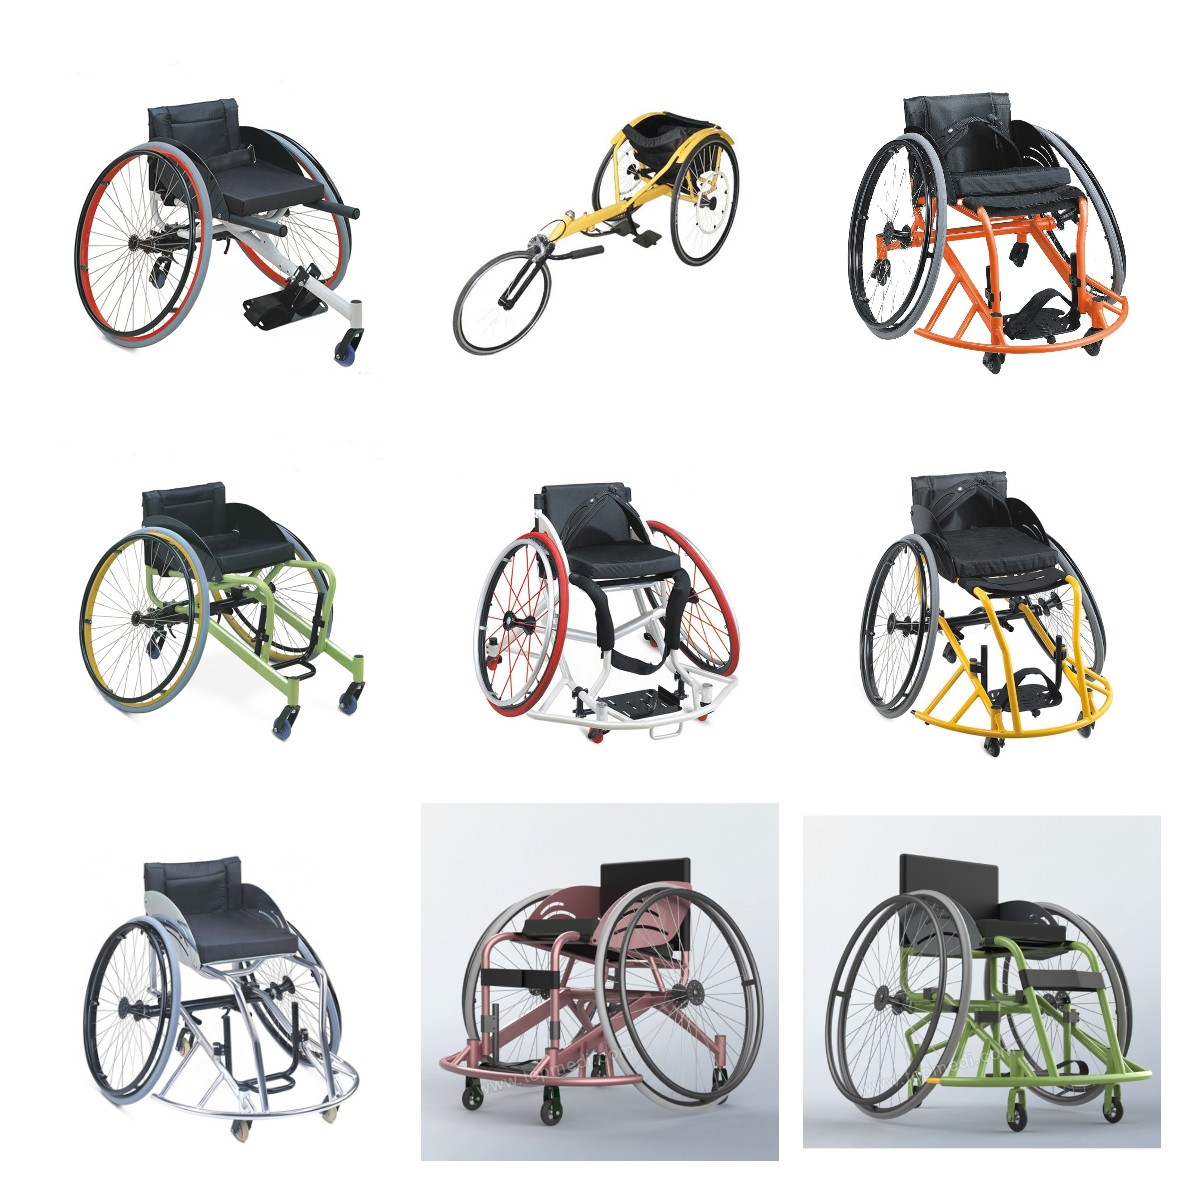 Sports wheelchair to support the Paris Paralympics